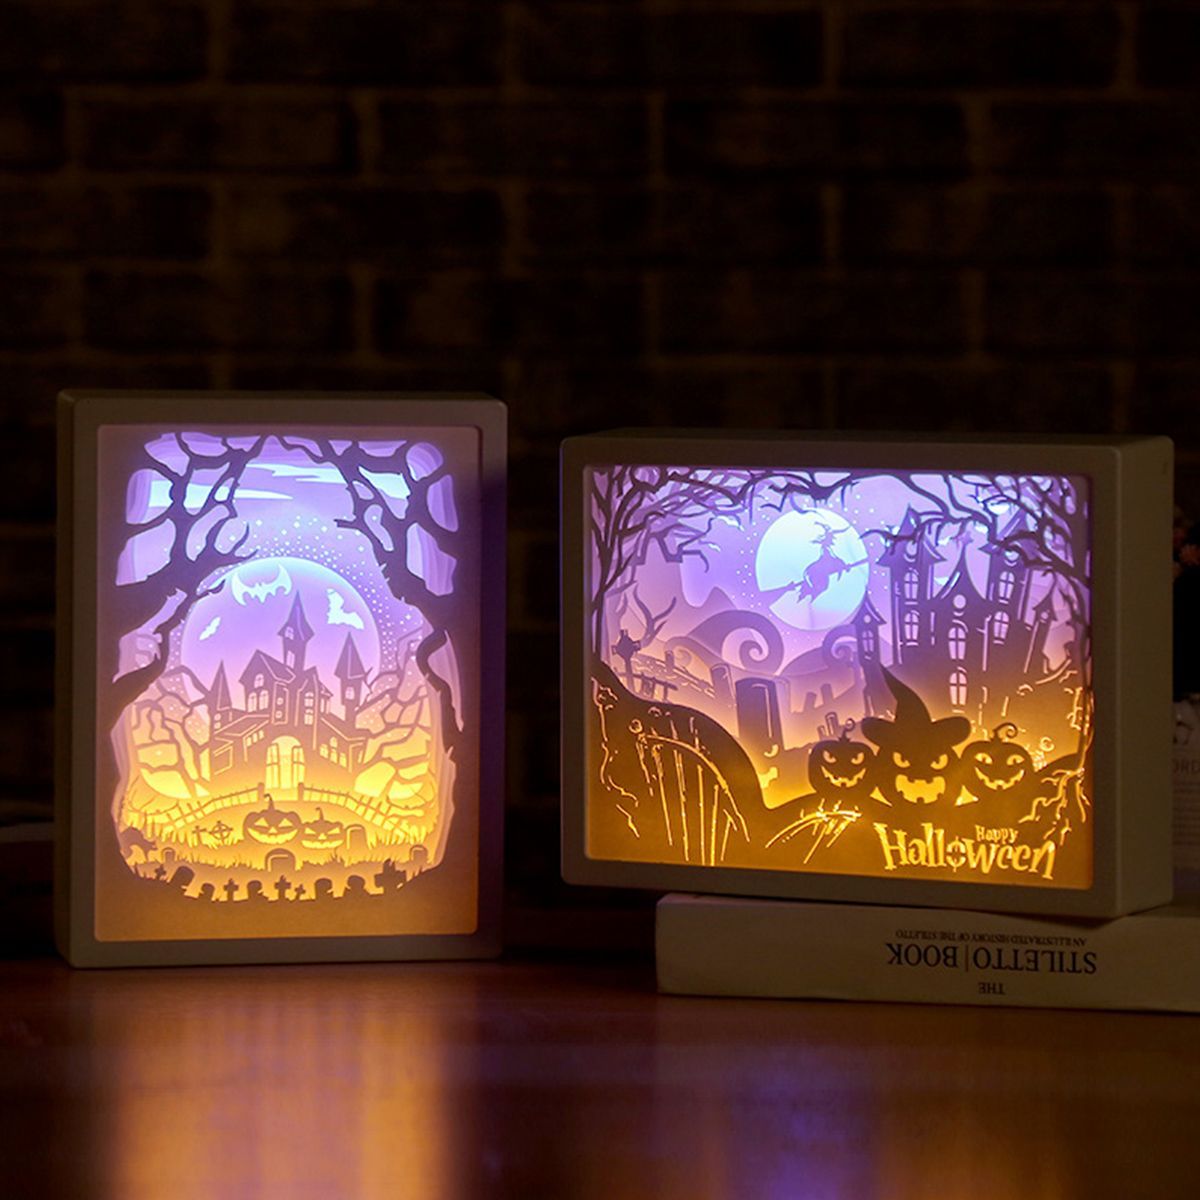 Christmas-LED-Carving-Night-Light-3D-Shadow-Paper-Sculptures-Lamp-Lamp-LED-Gift-Home-Desk-Decoration-1576067